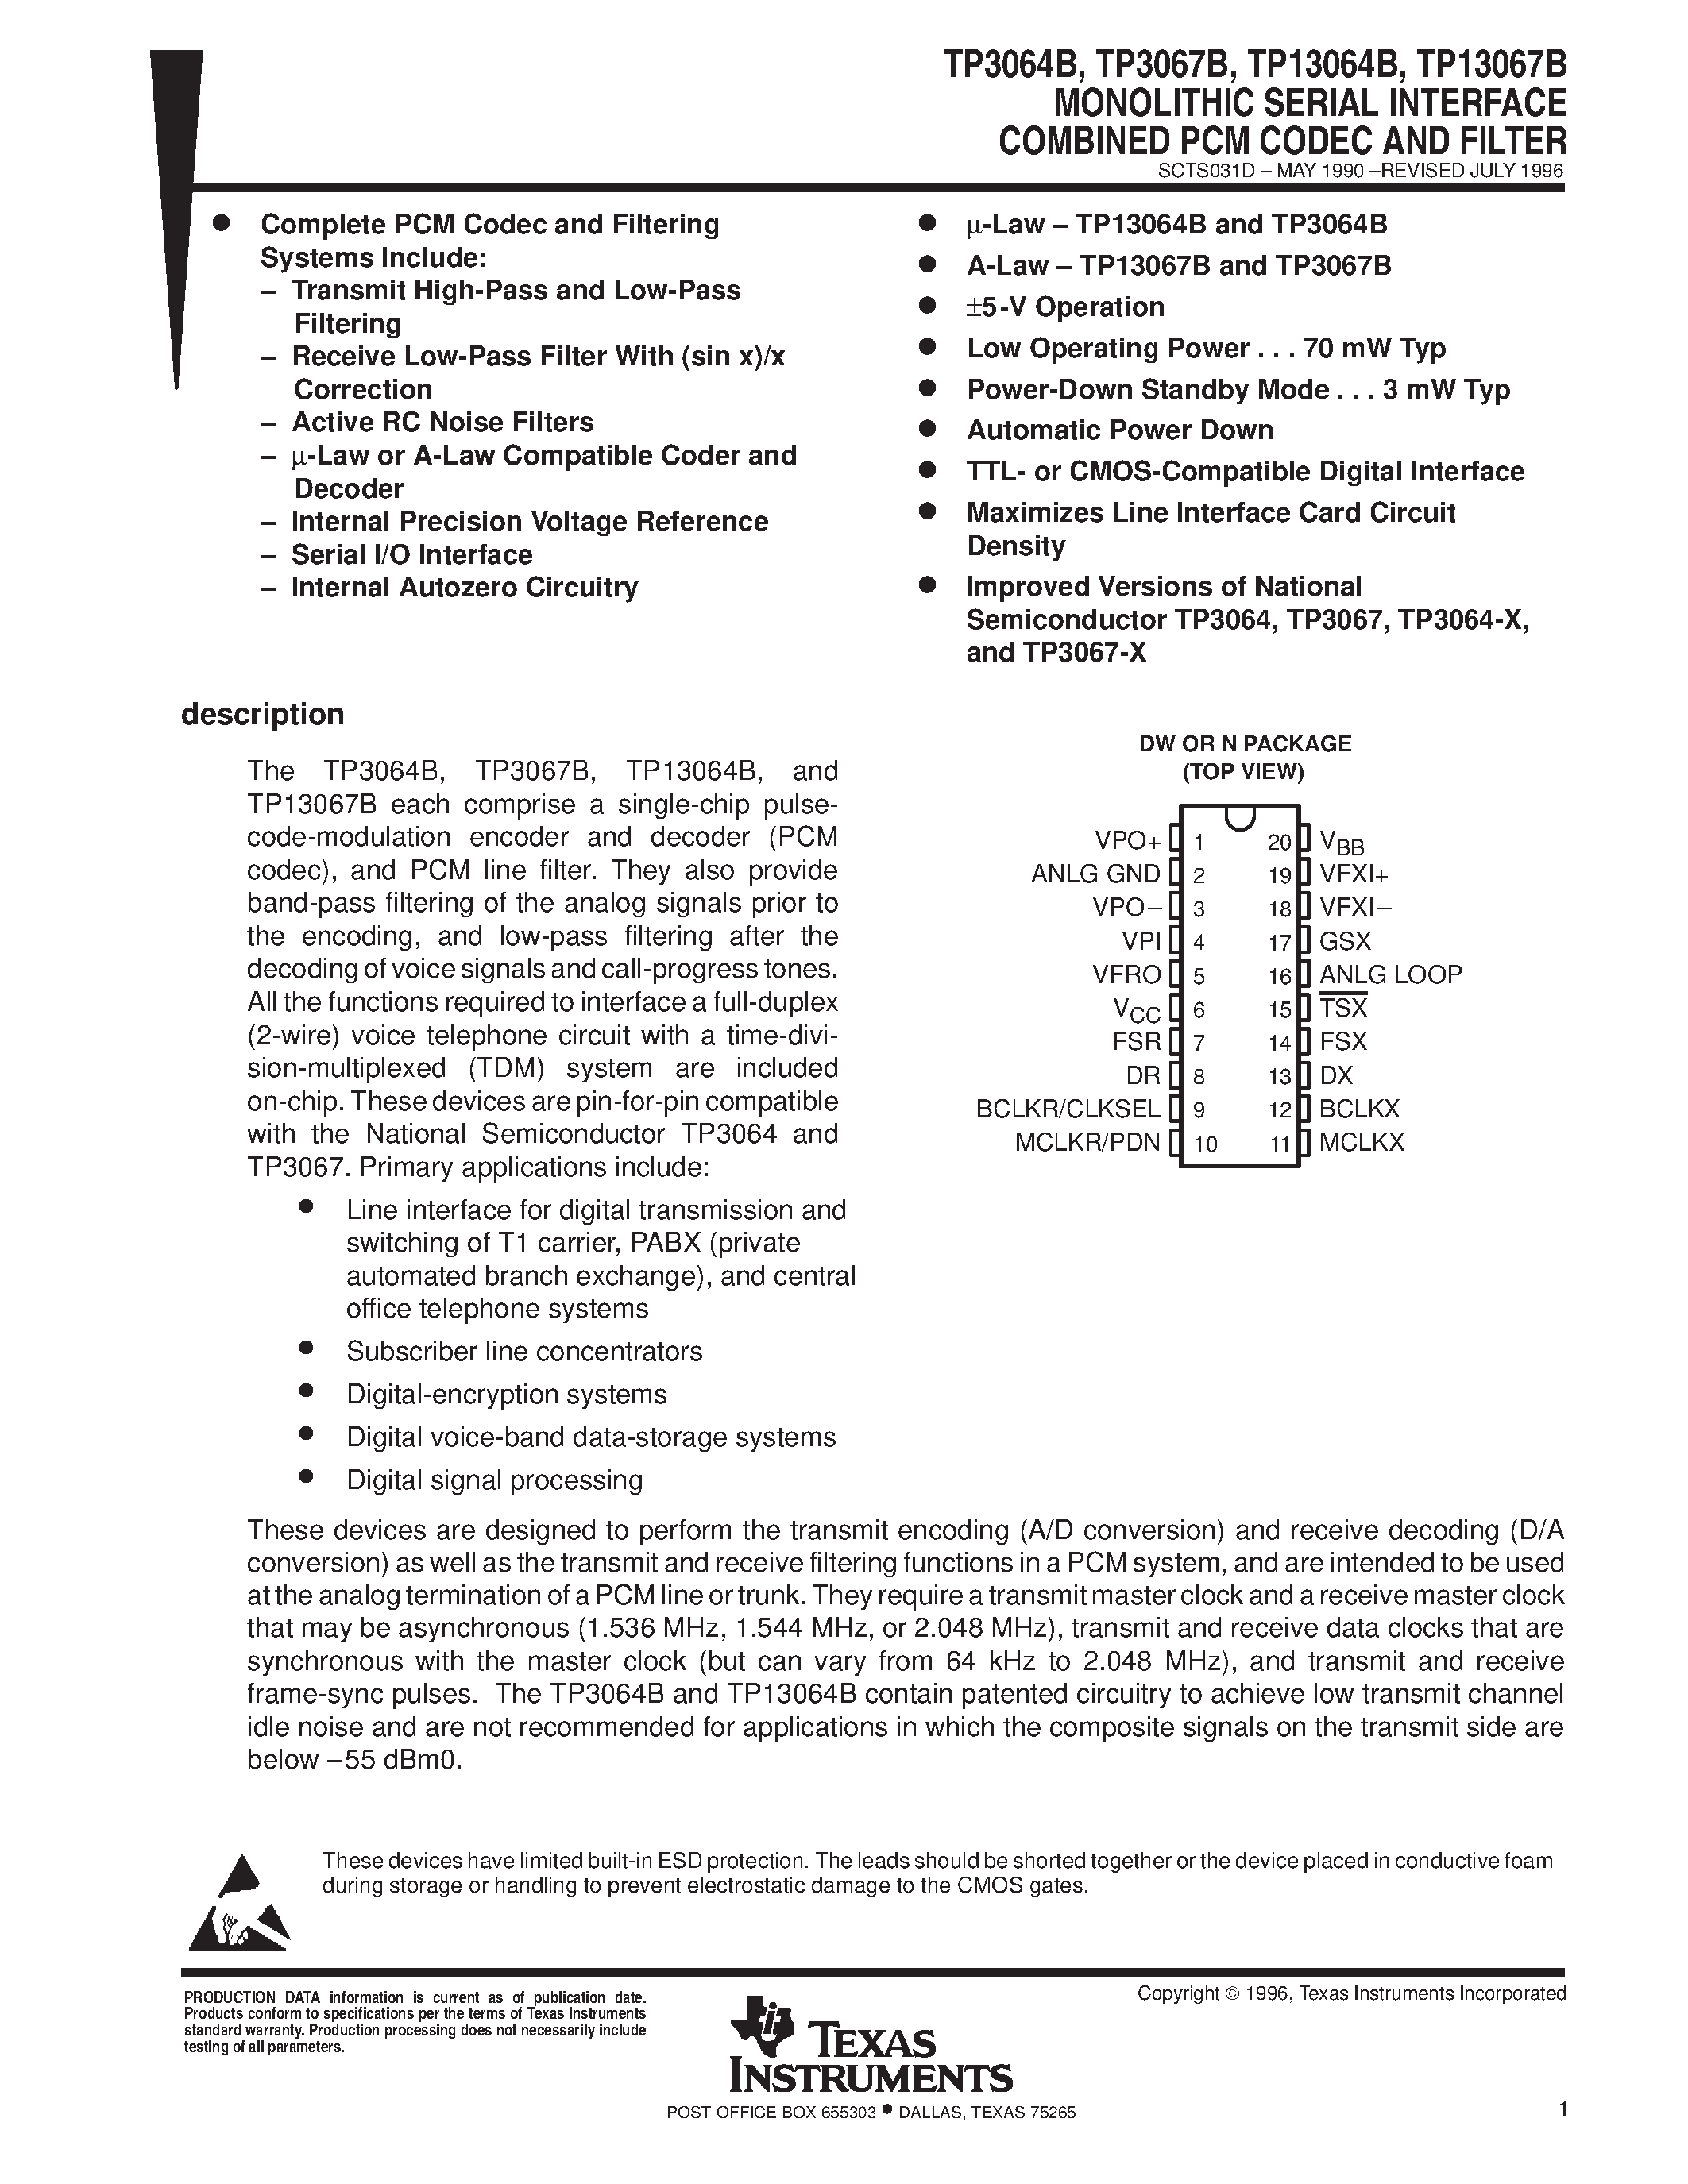 Datasheet TP13067B - MONOLITHIC SERIAL INTERFACE COMBINED PCM CODEC AND FILTER page 1